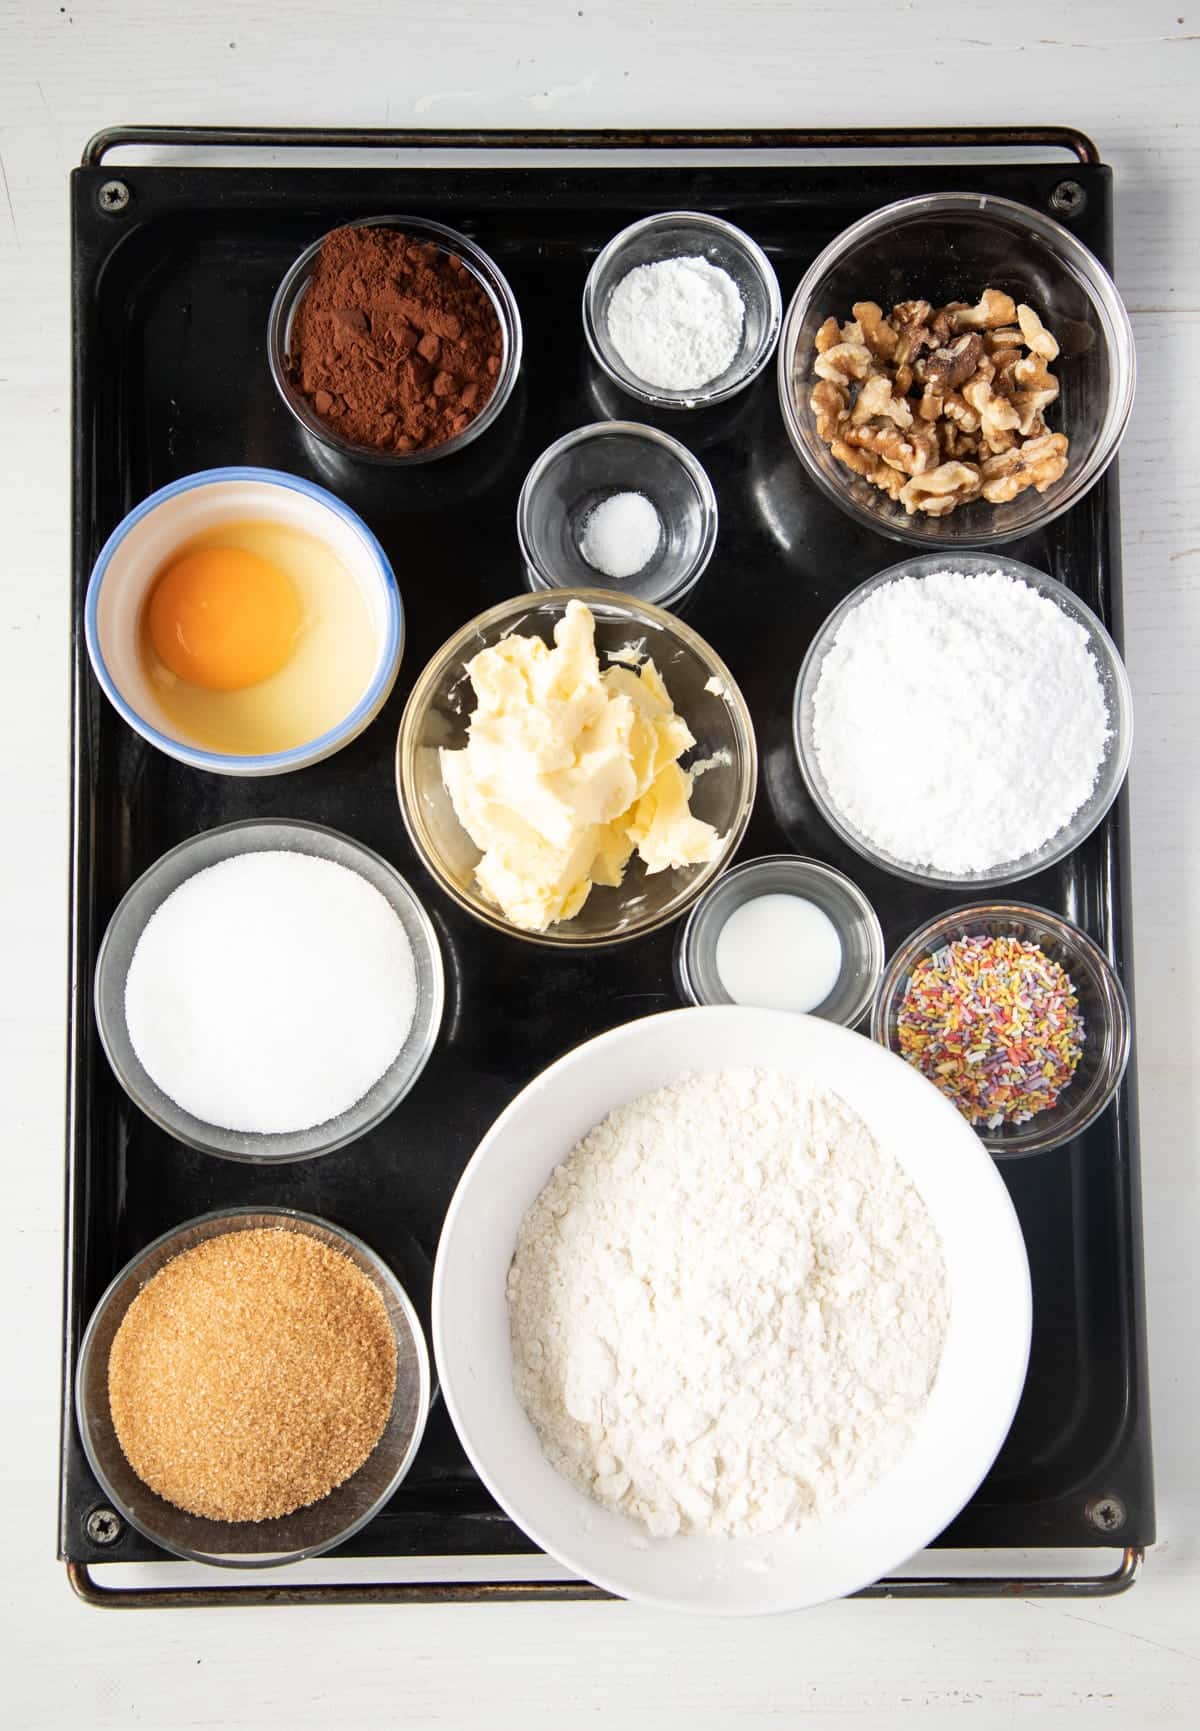 ingredients for making chocolate cookies with walnuts in many small bowls on a baking tray.